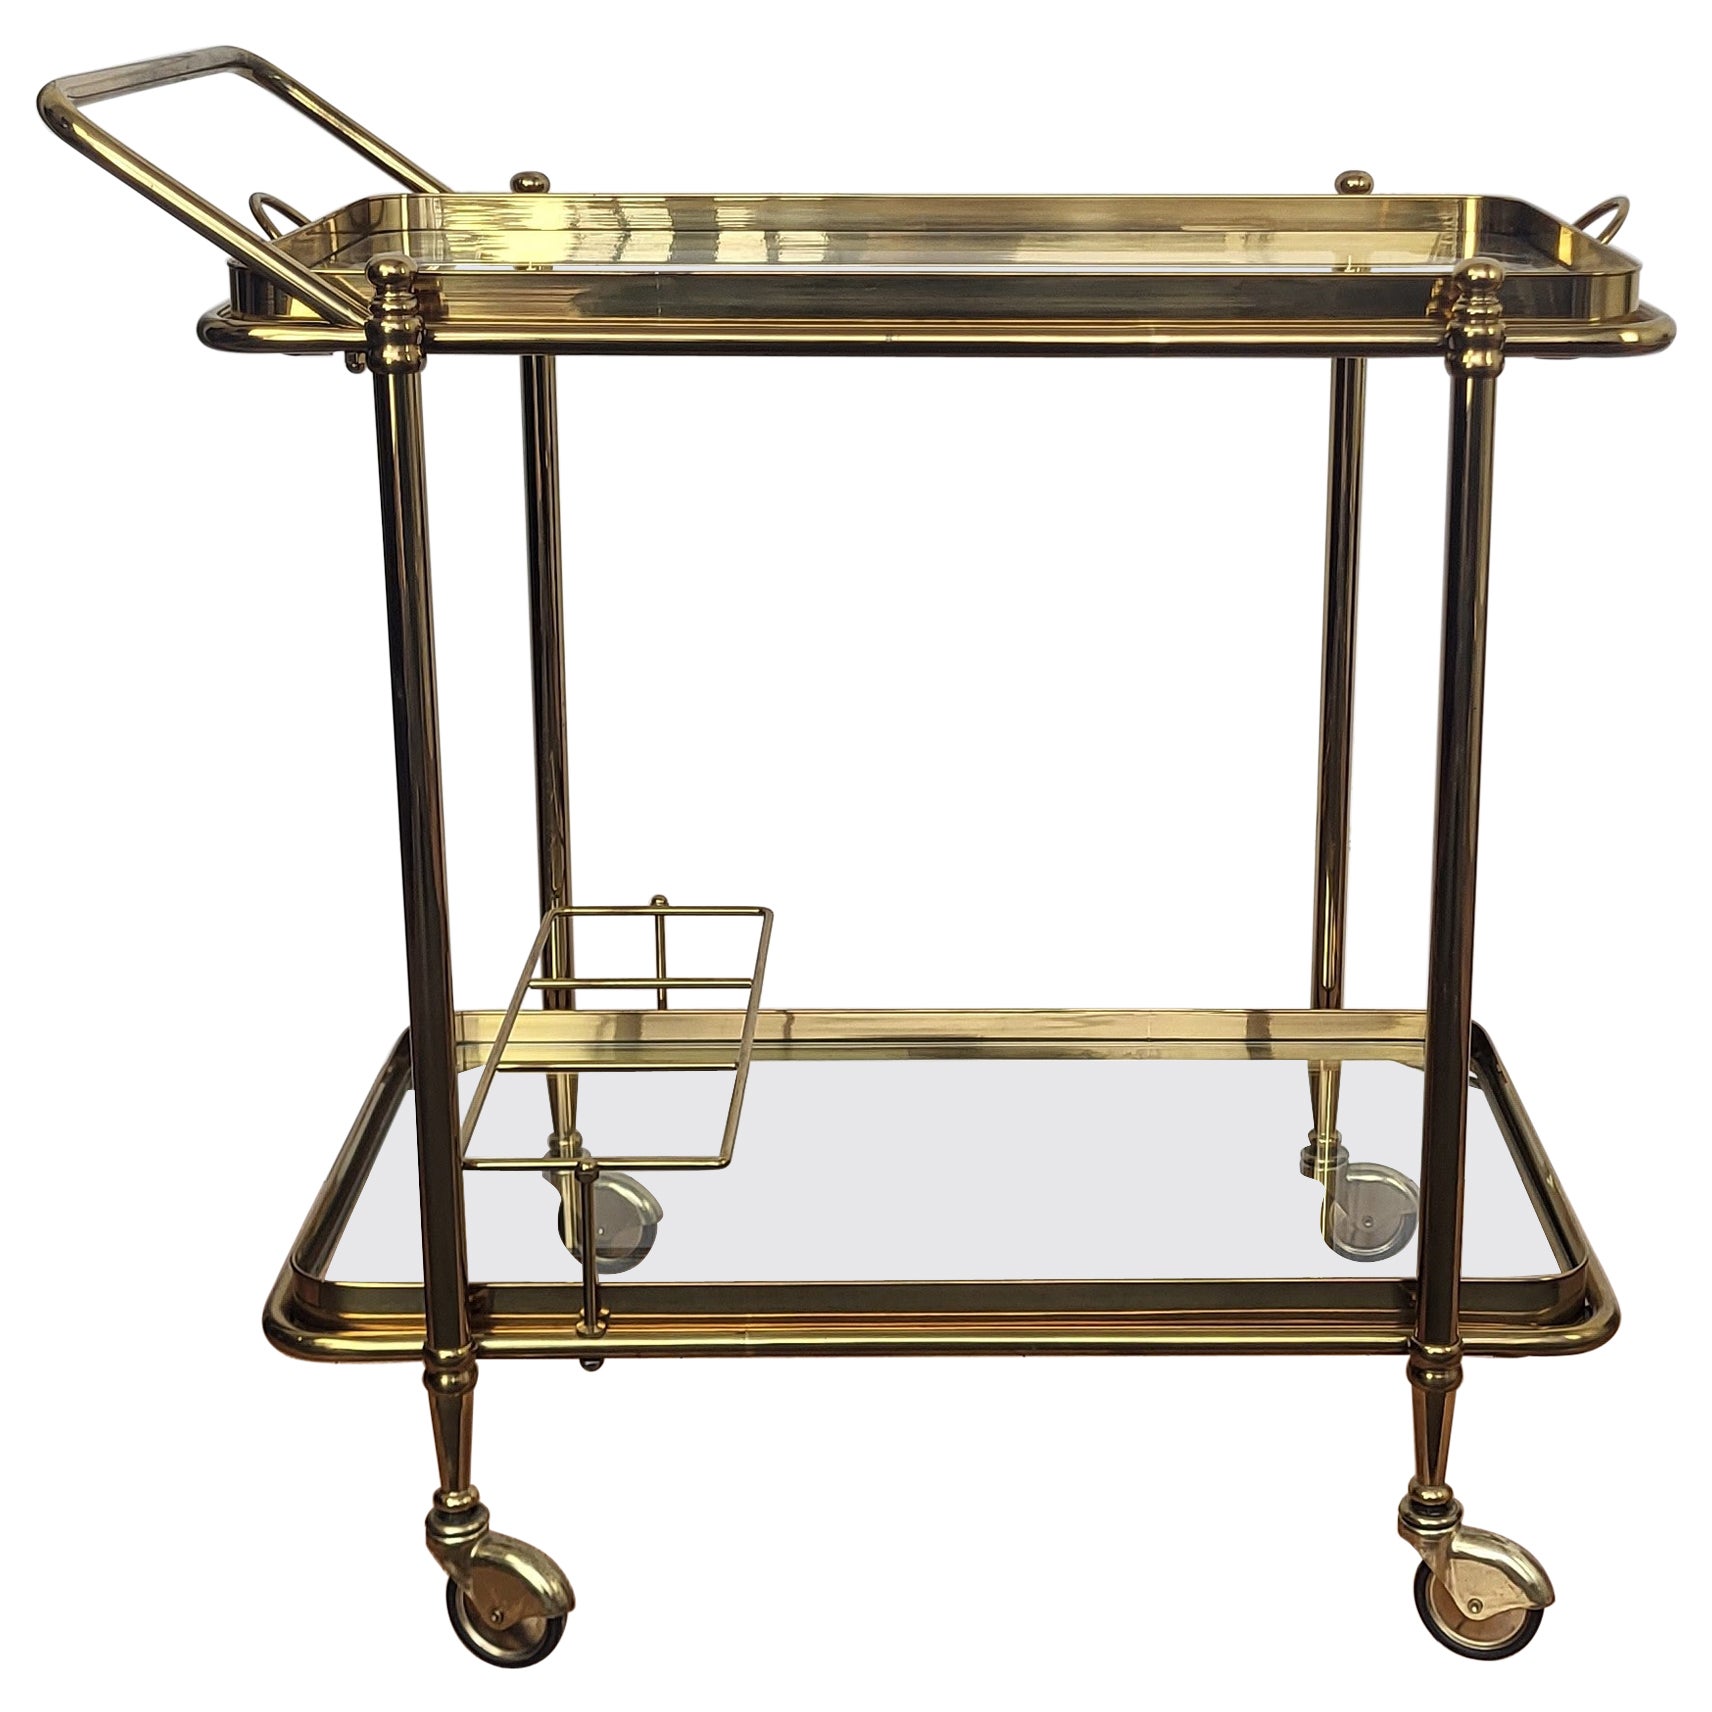 1970s Italian Two-Tier Gilt Brass Glass Bar Cart with Removable Top Tray